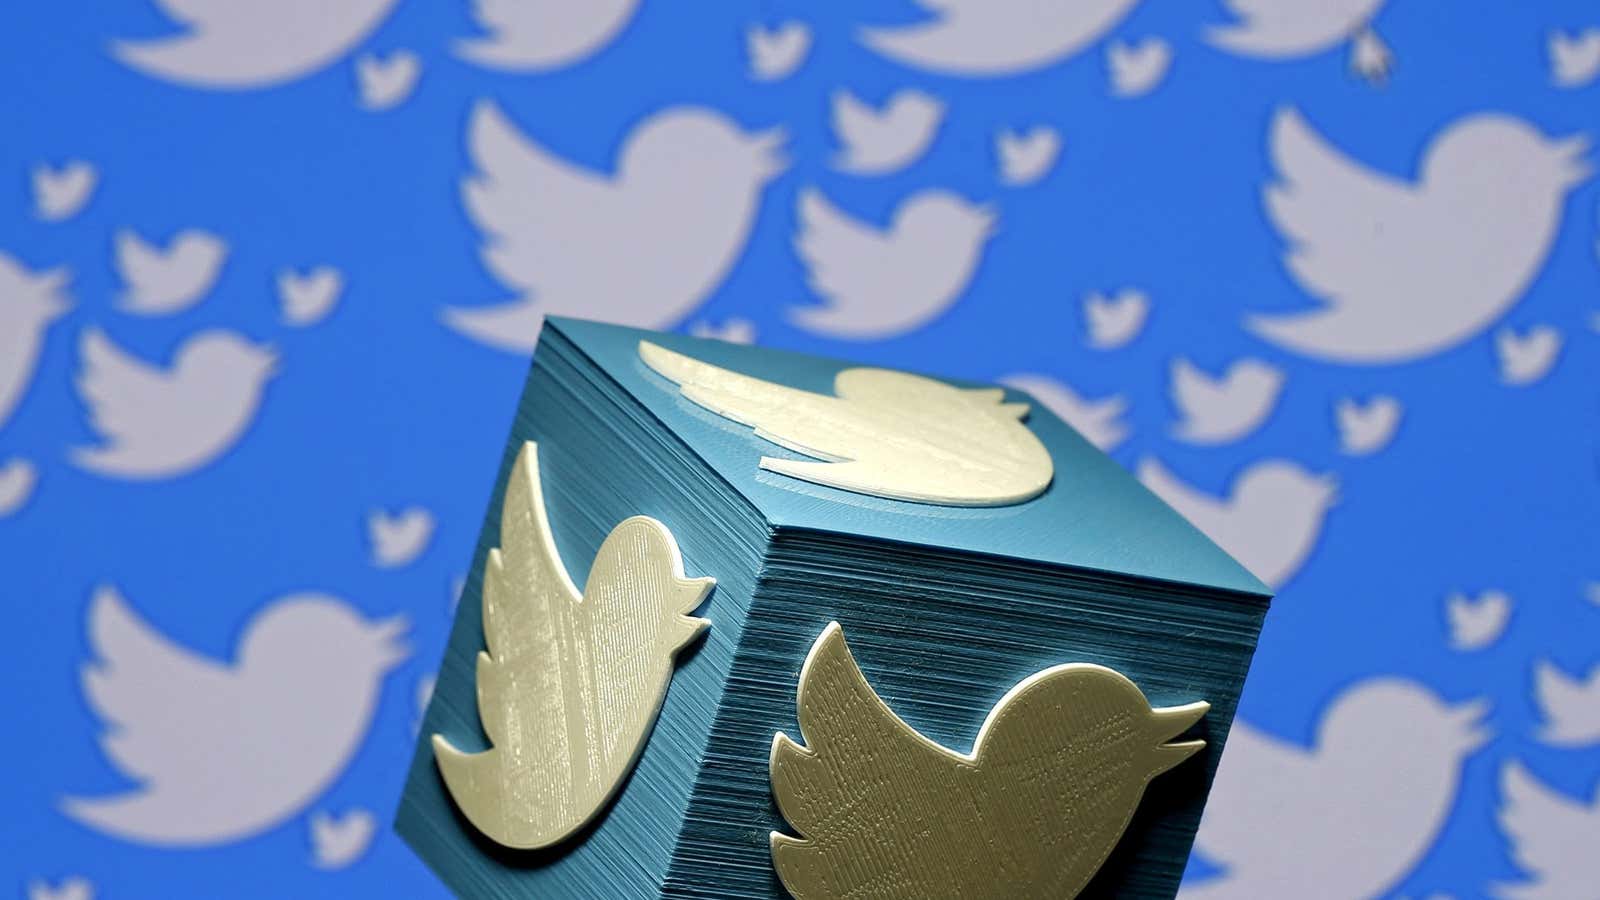 Twitter has received government information requests from 11 African countries since 2012.